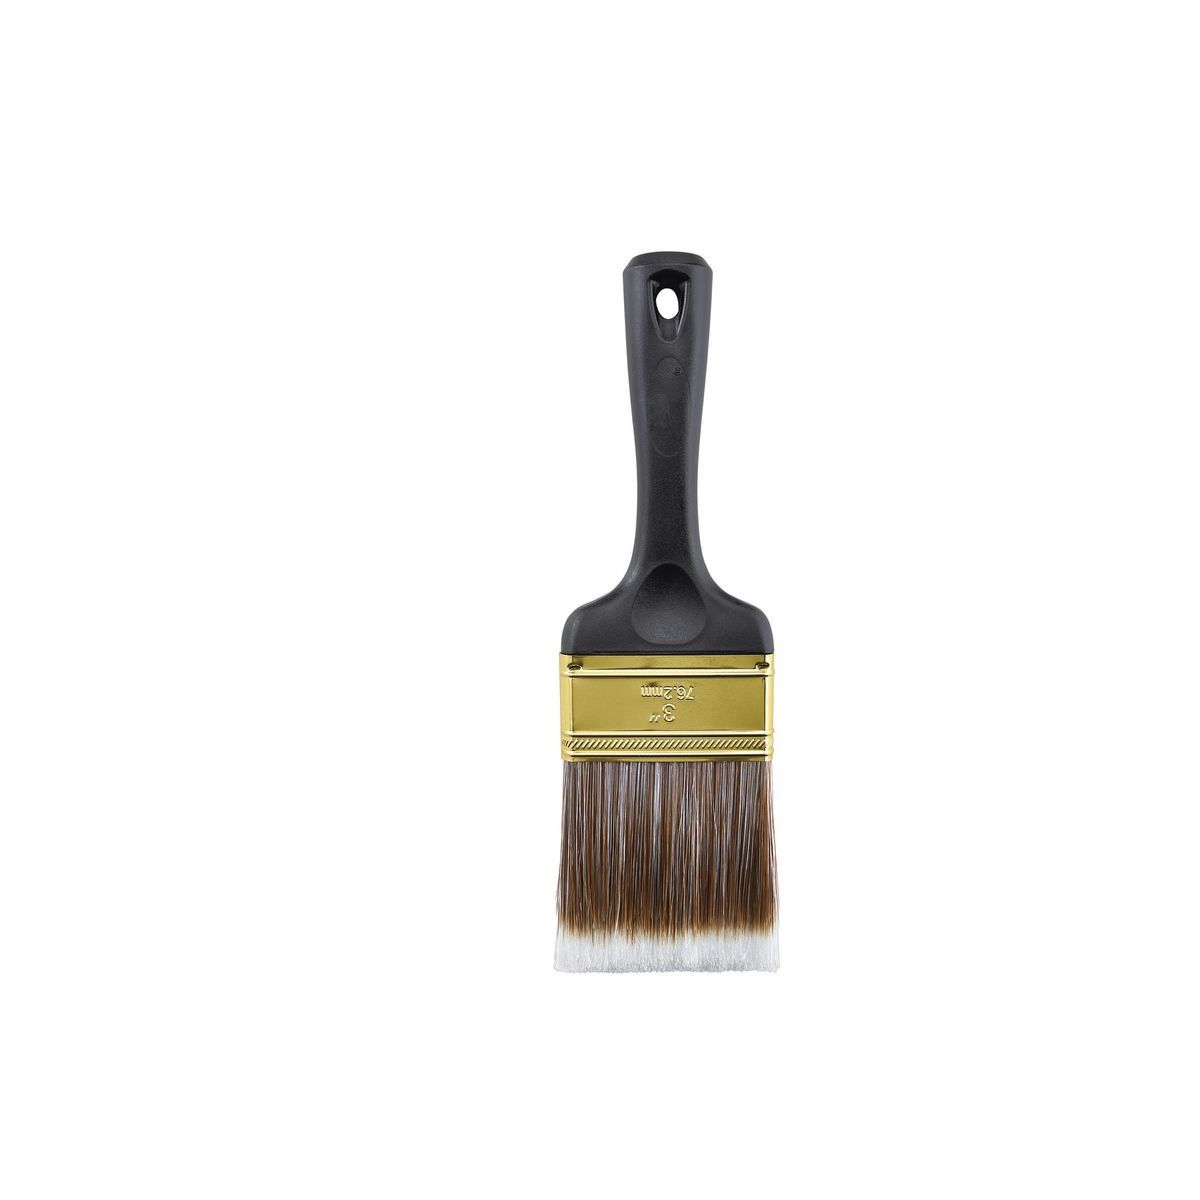 LINZER 3 in. Flat Paint Brush, GOOD Quality